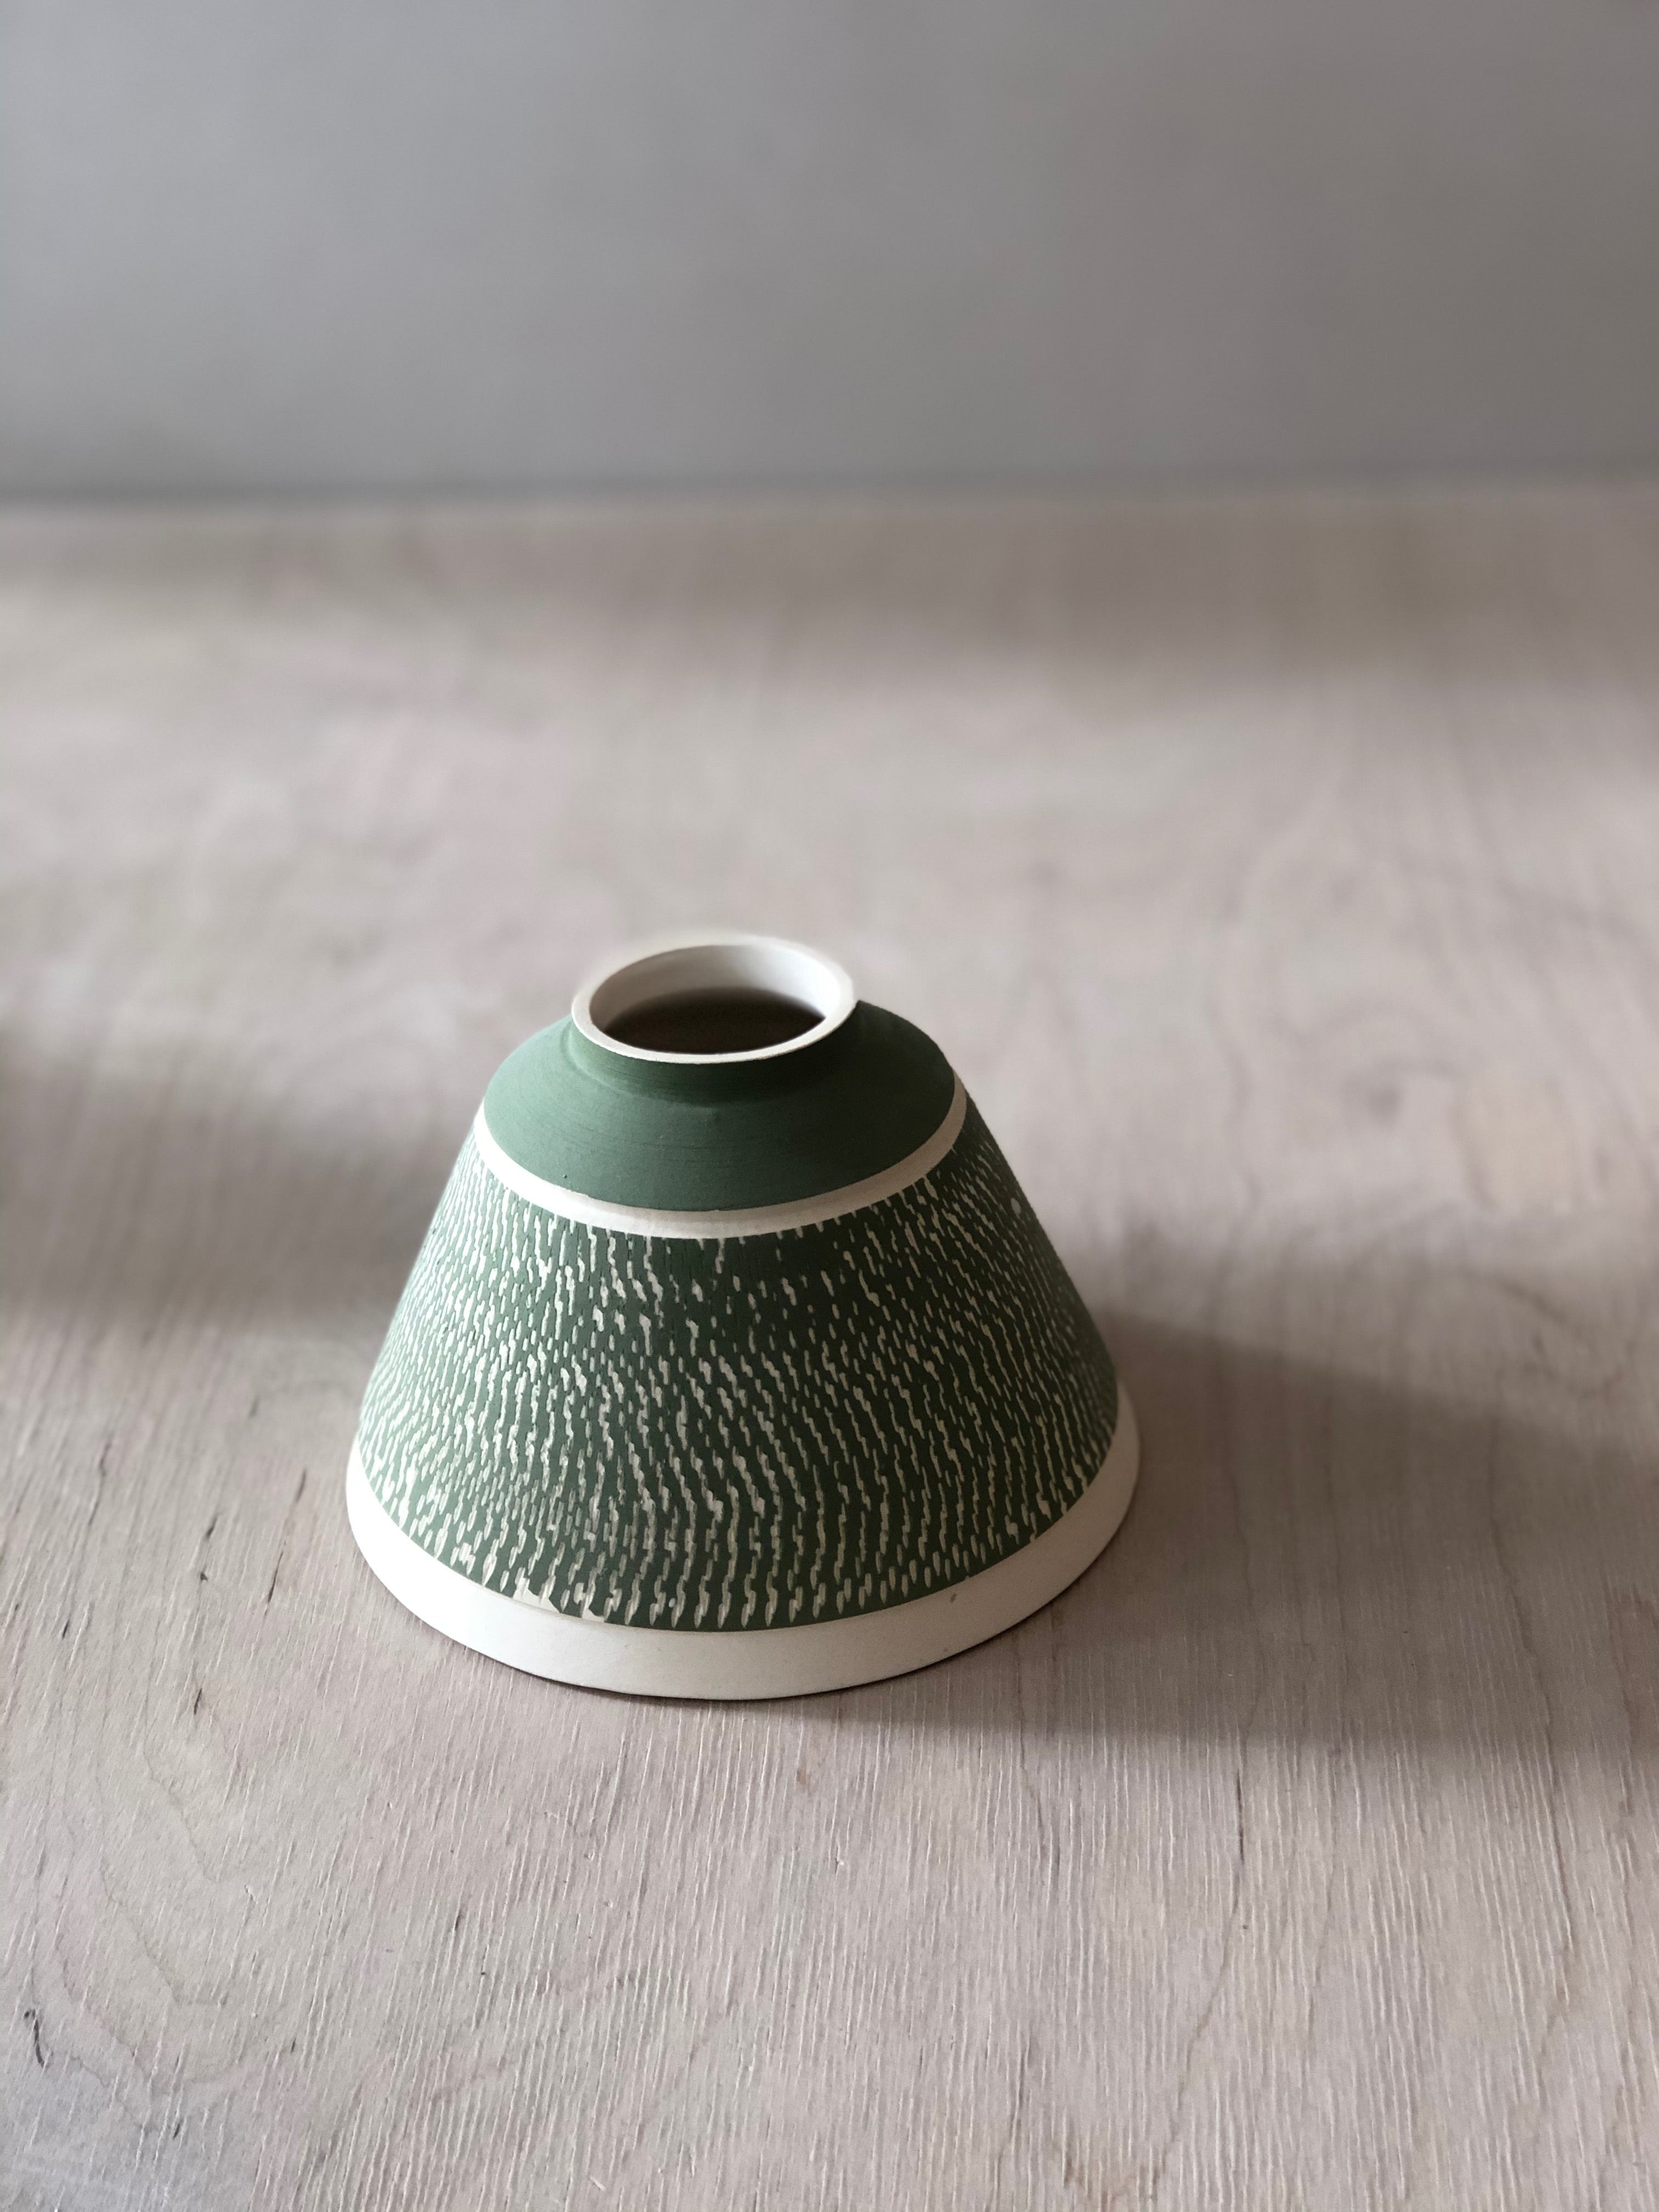 Small green pyramid vase with chattering decoration